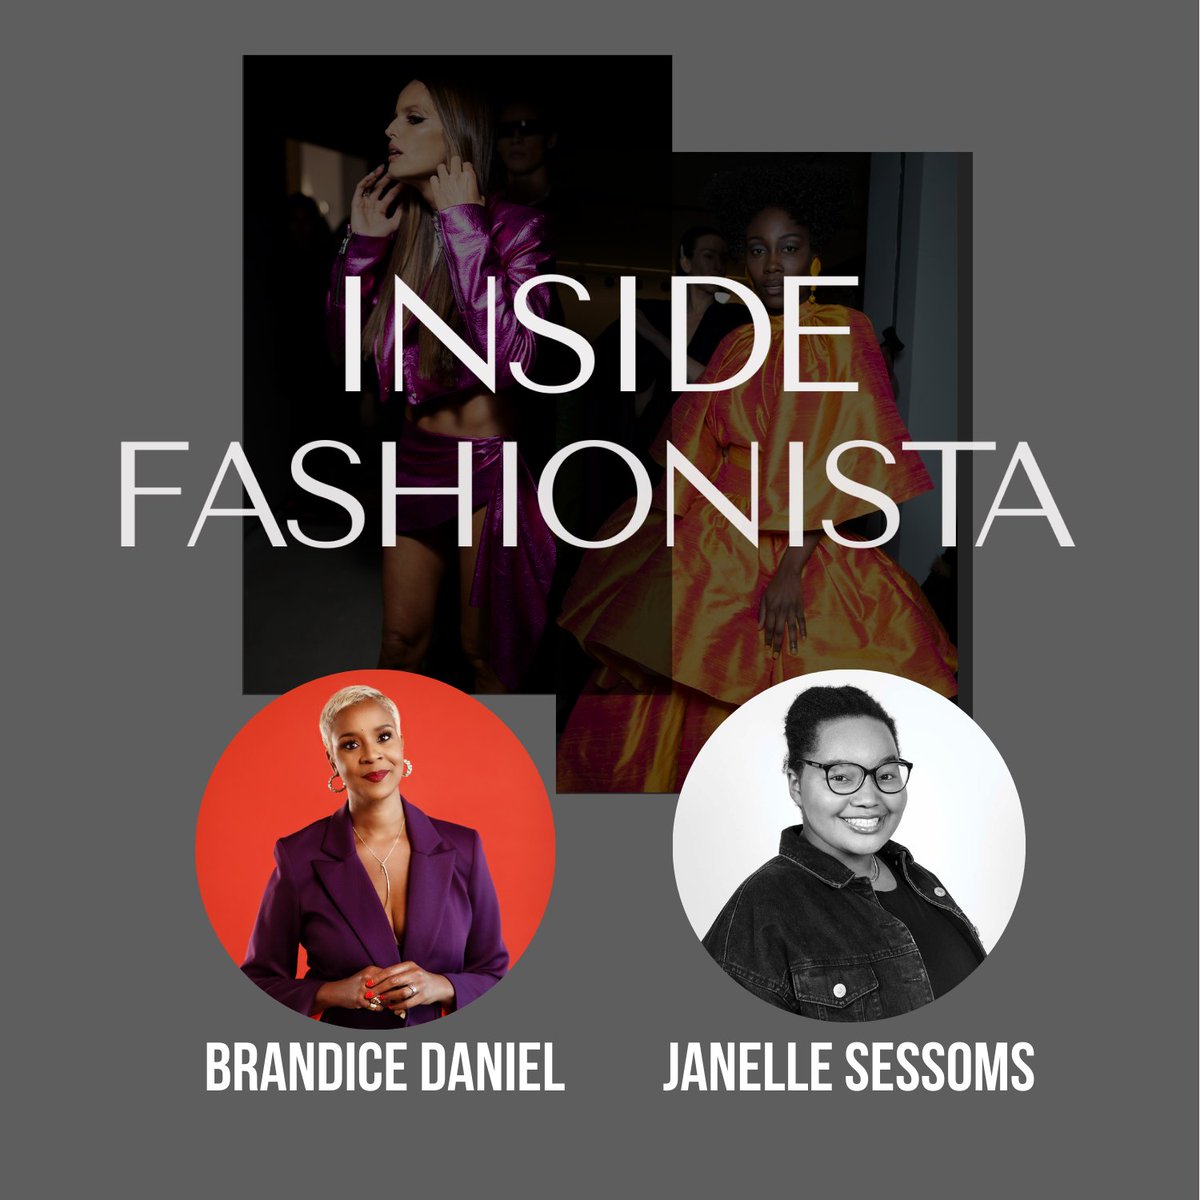 Discover how @brandicedaniel, founder & CEO of Harlem's Fashion Row, is championing designers of color and shaping the future of inclusivity in fashion. 
Live on the Fashionista Network, Tuesday, April 30th, 2:30pm ET. f.chat/yrLL 

#thefashionistanetwork…